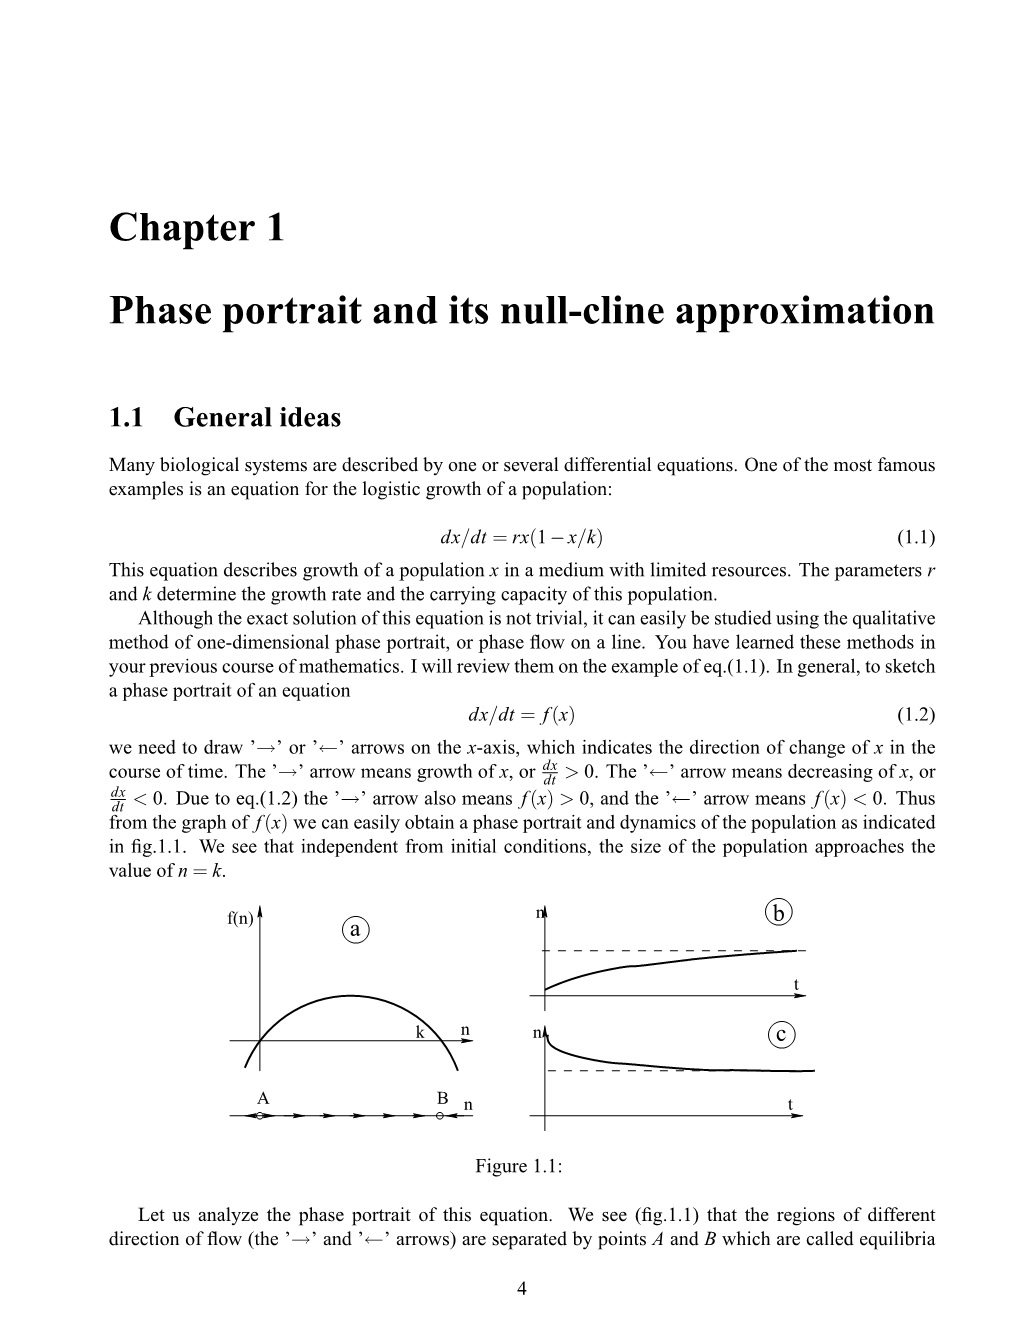 Chapter 1 Phase Portrait and Its Null-Cline Approximation